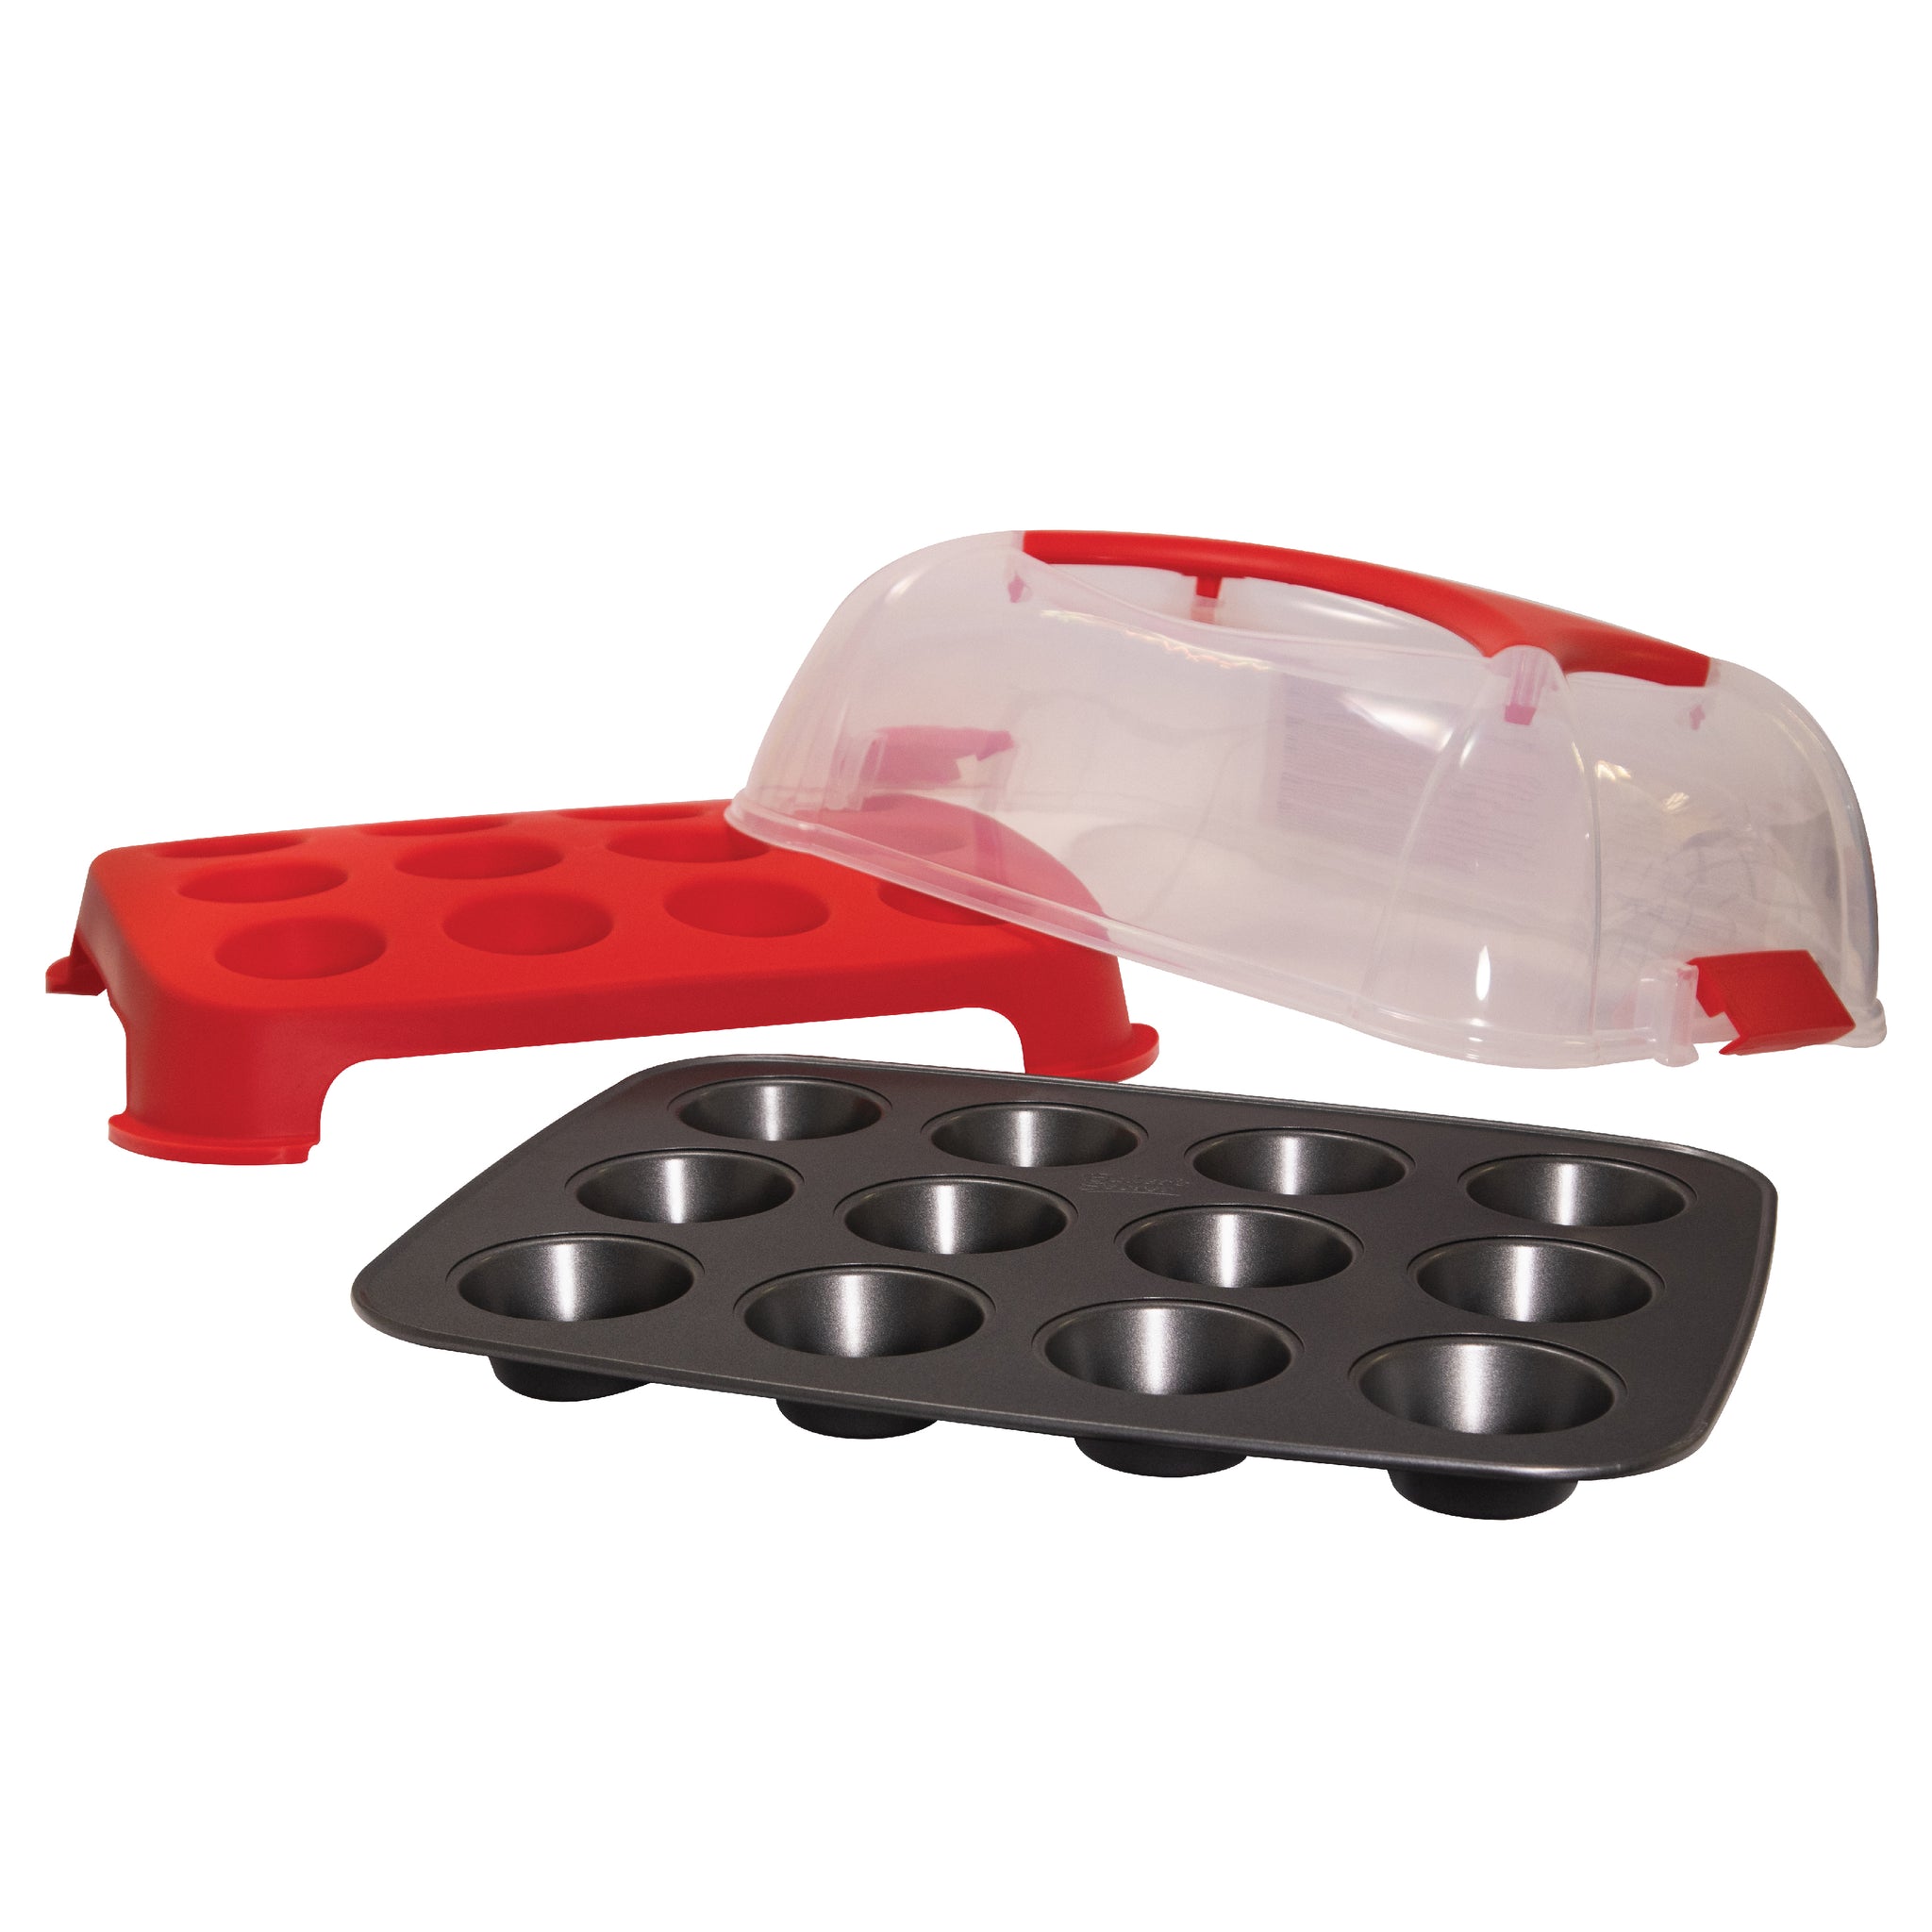 24 Cups Muffin Cake Carrier and Pan Default Title Bakeware Sets - Baker's Secret